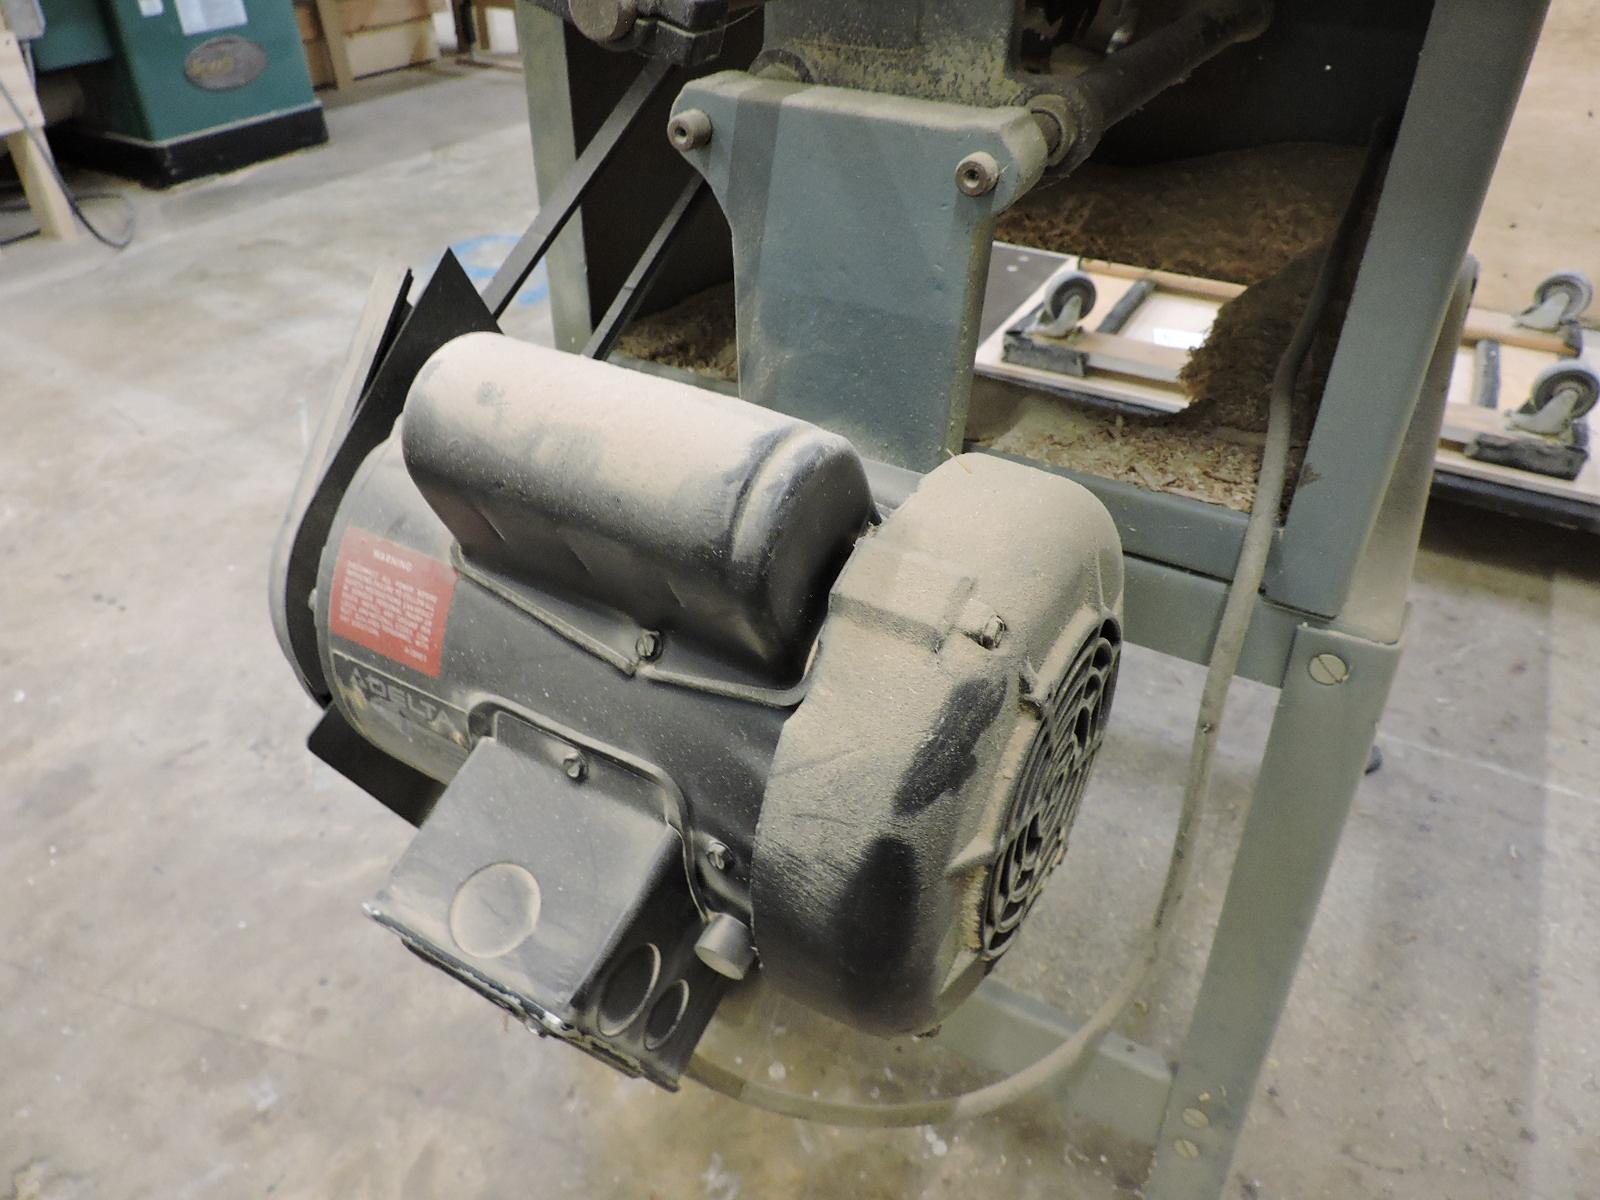 DELTA Table Saw - Model: 10 / Also called a Contractor's Saw